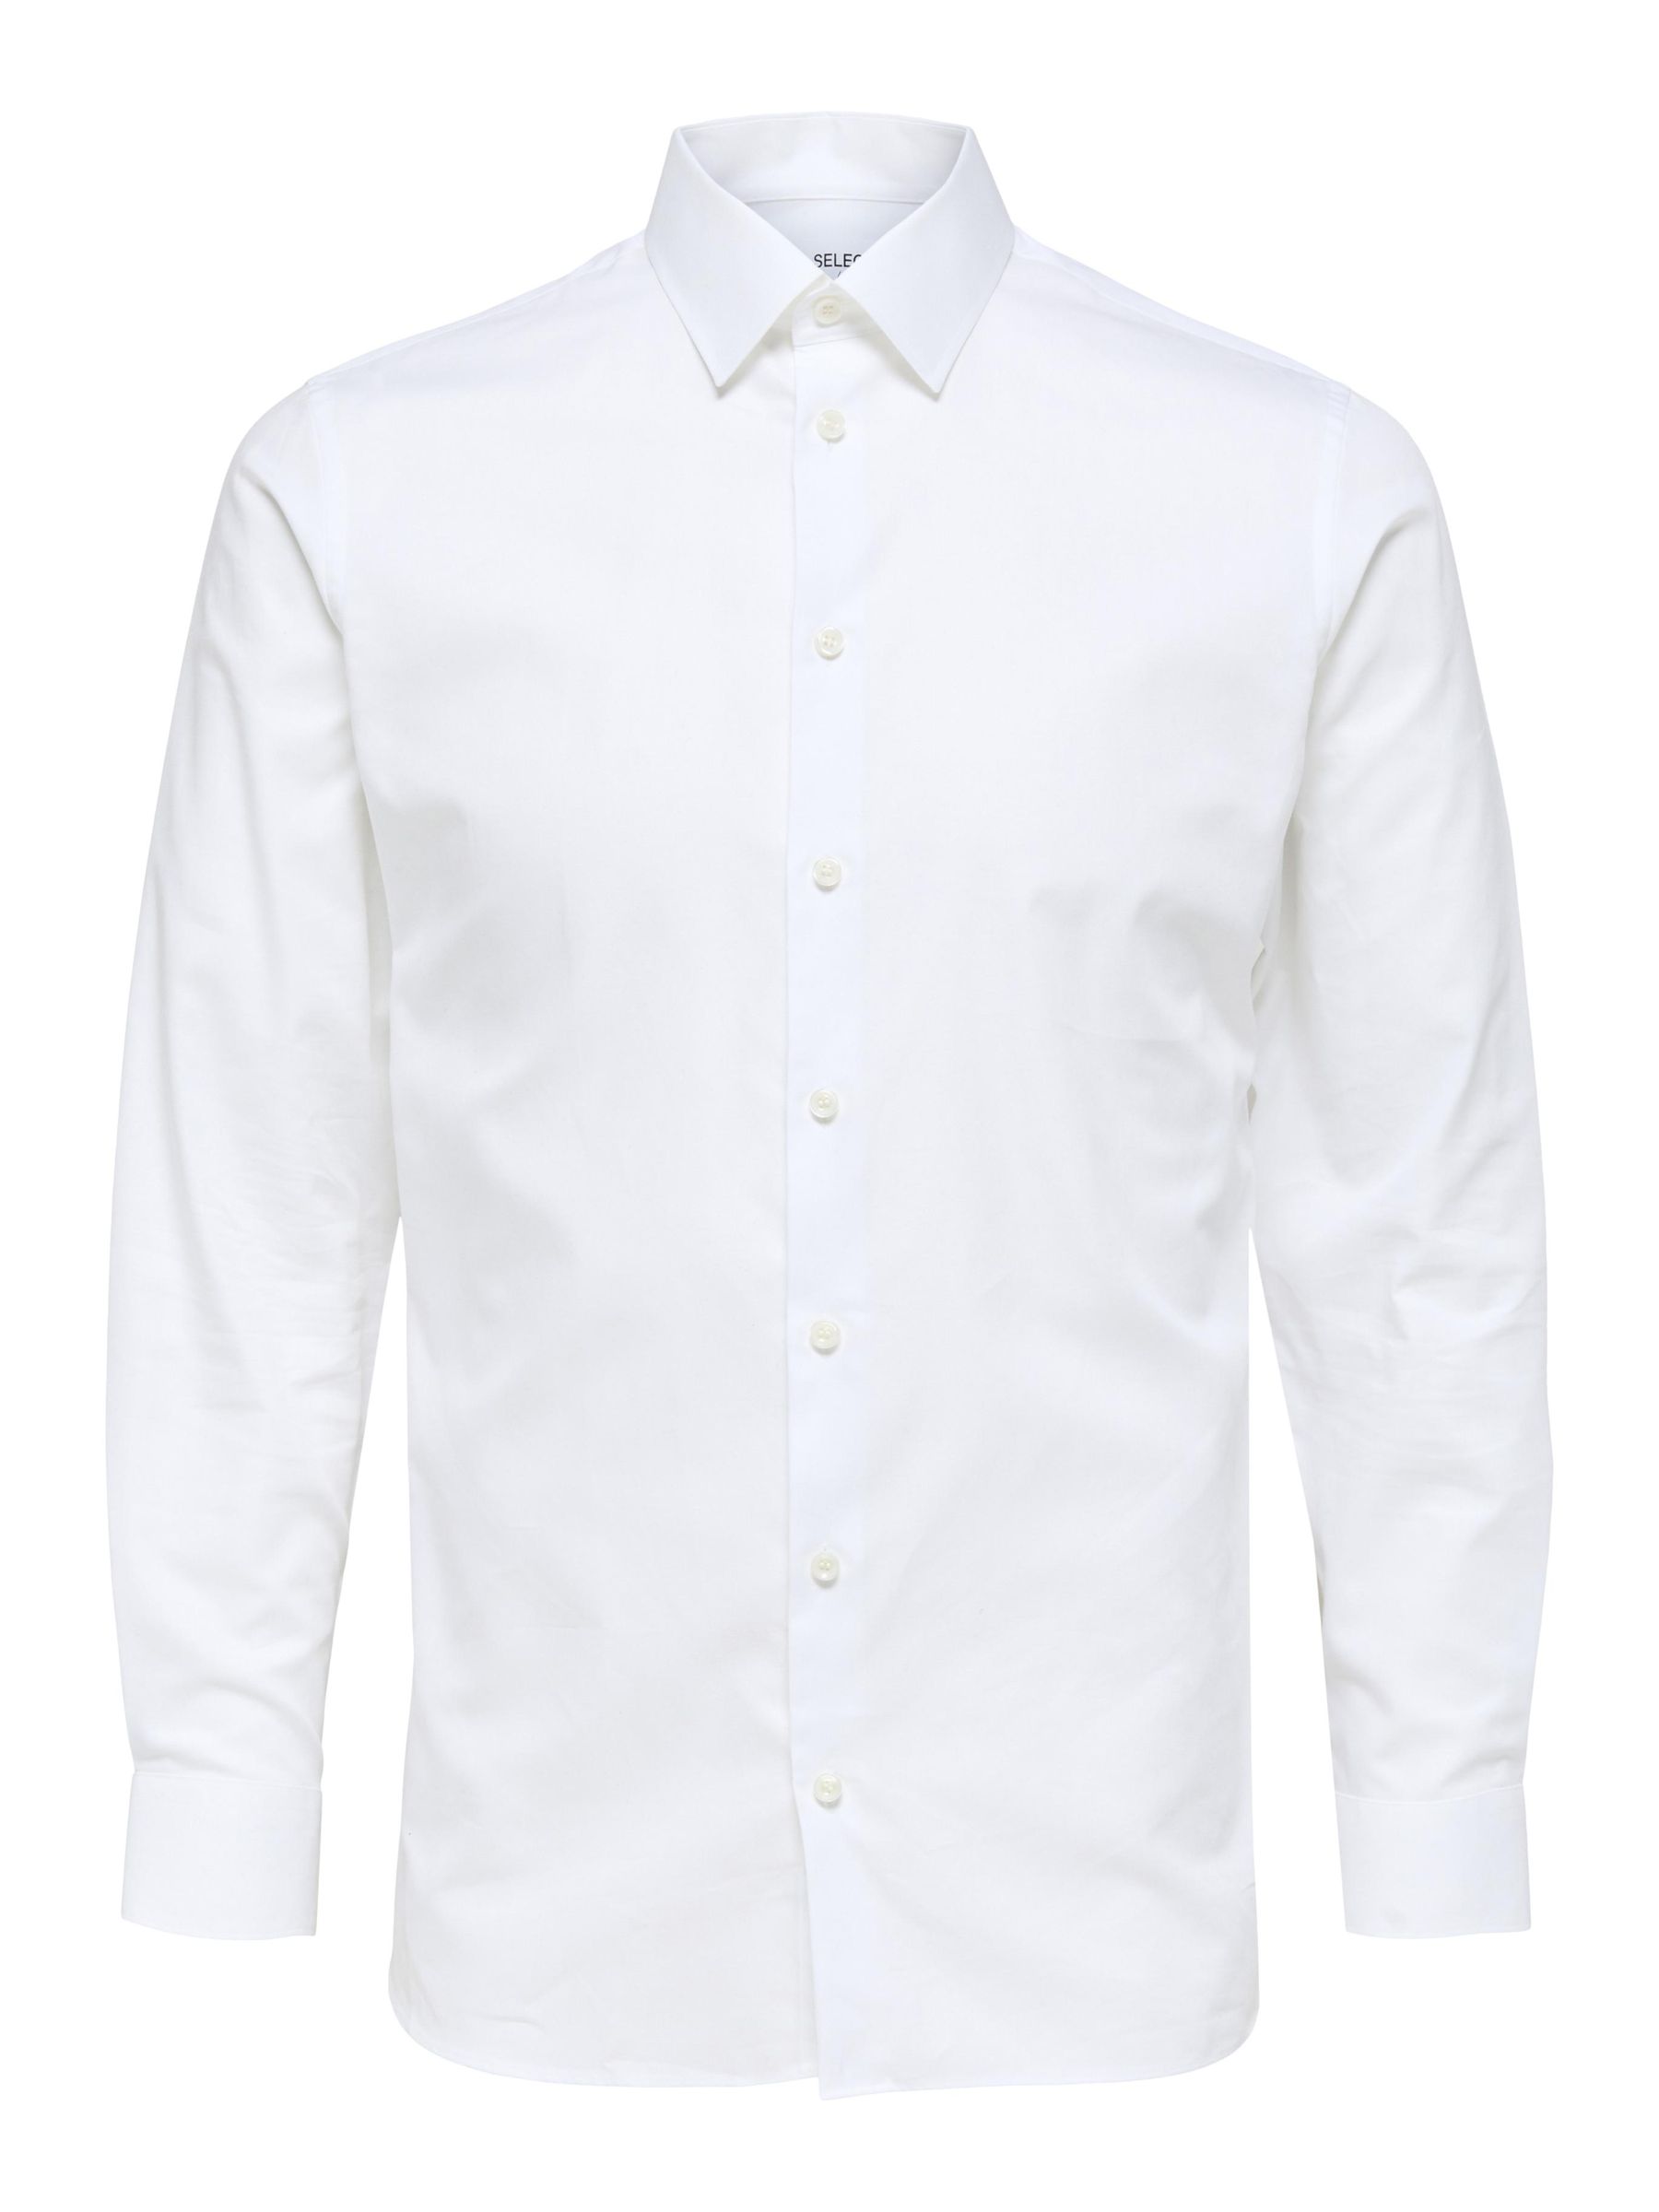 LONG-SLEEVED SELECTED | SLIM White SHIRT HOMME® | FIT